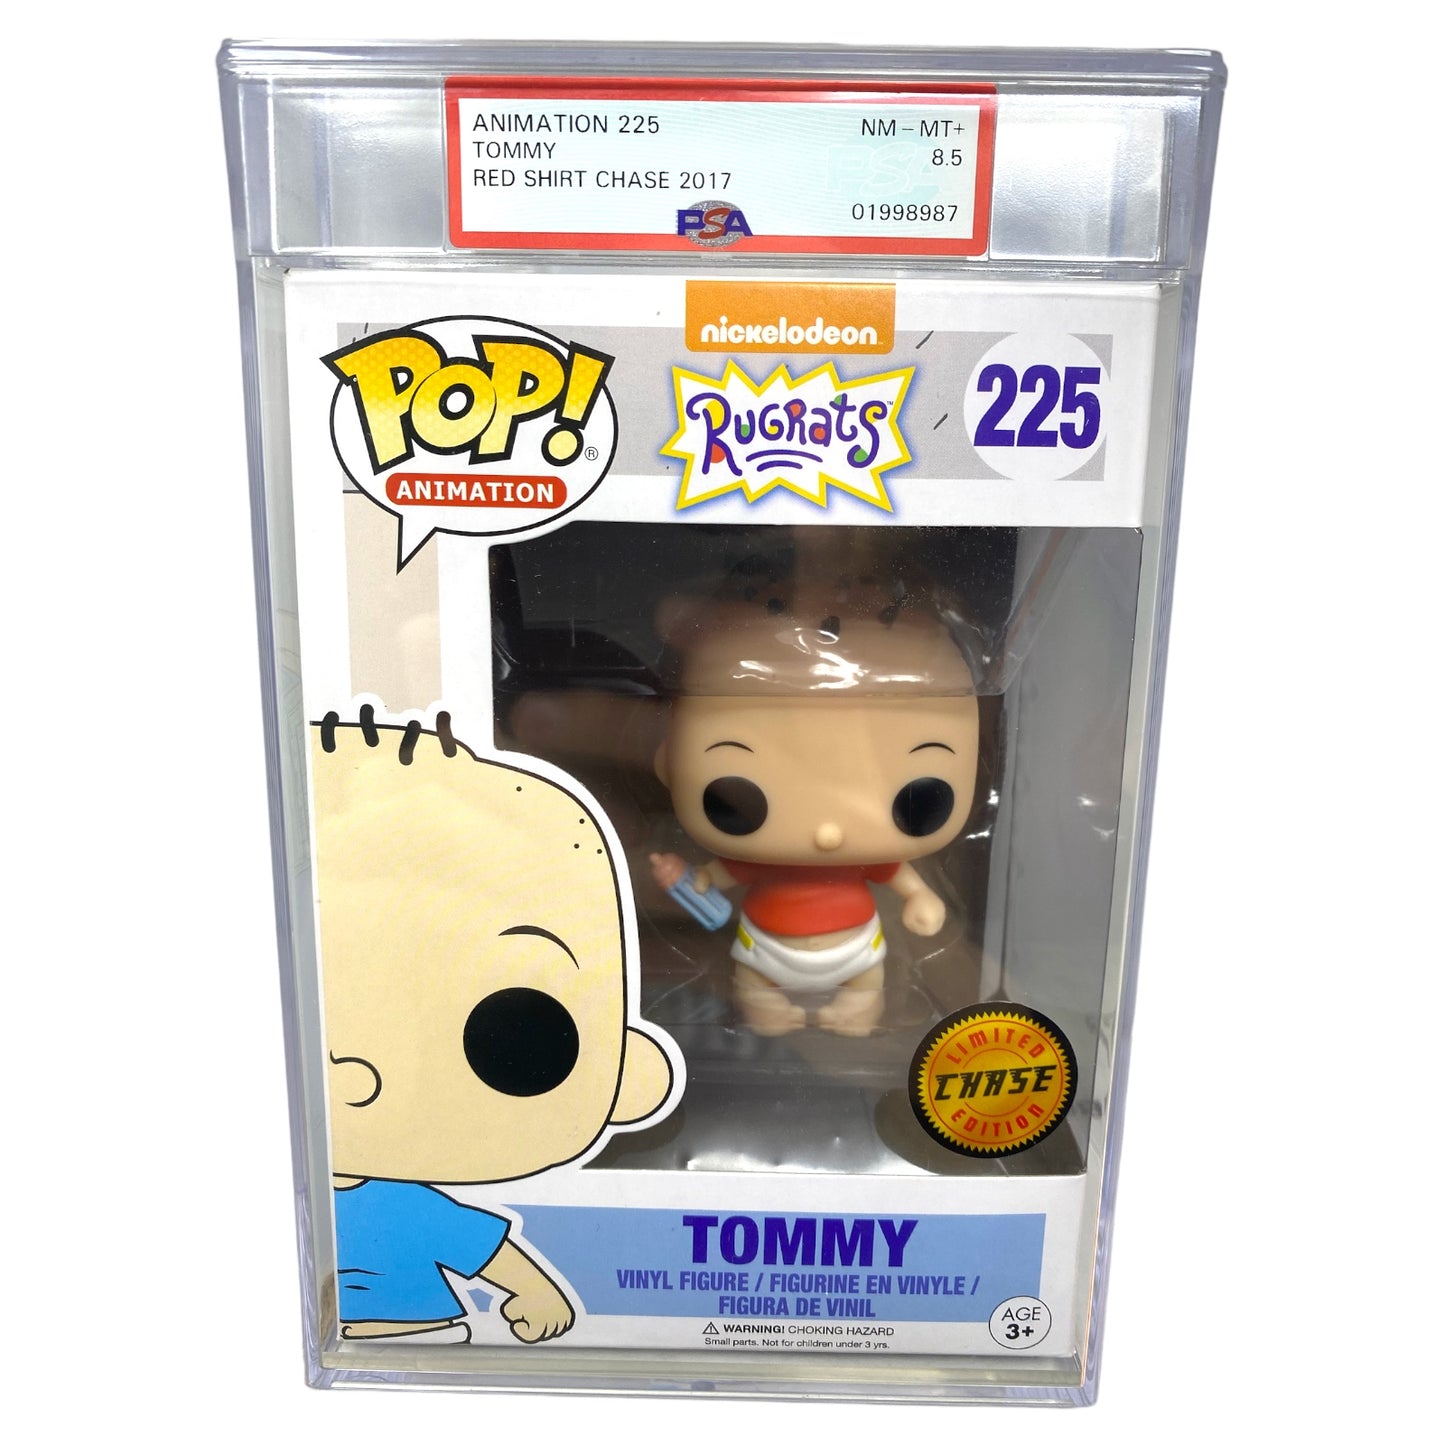 PSA Grade 8.5 2017 Tommy Red Shirt Chase 225